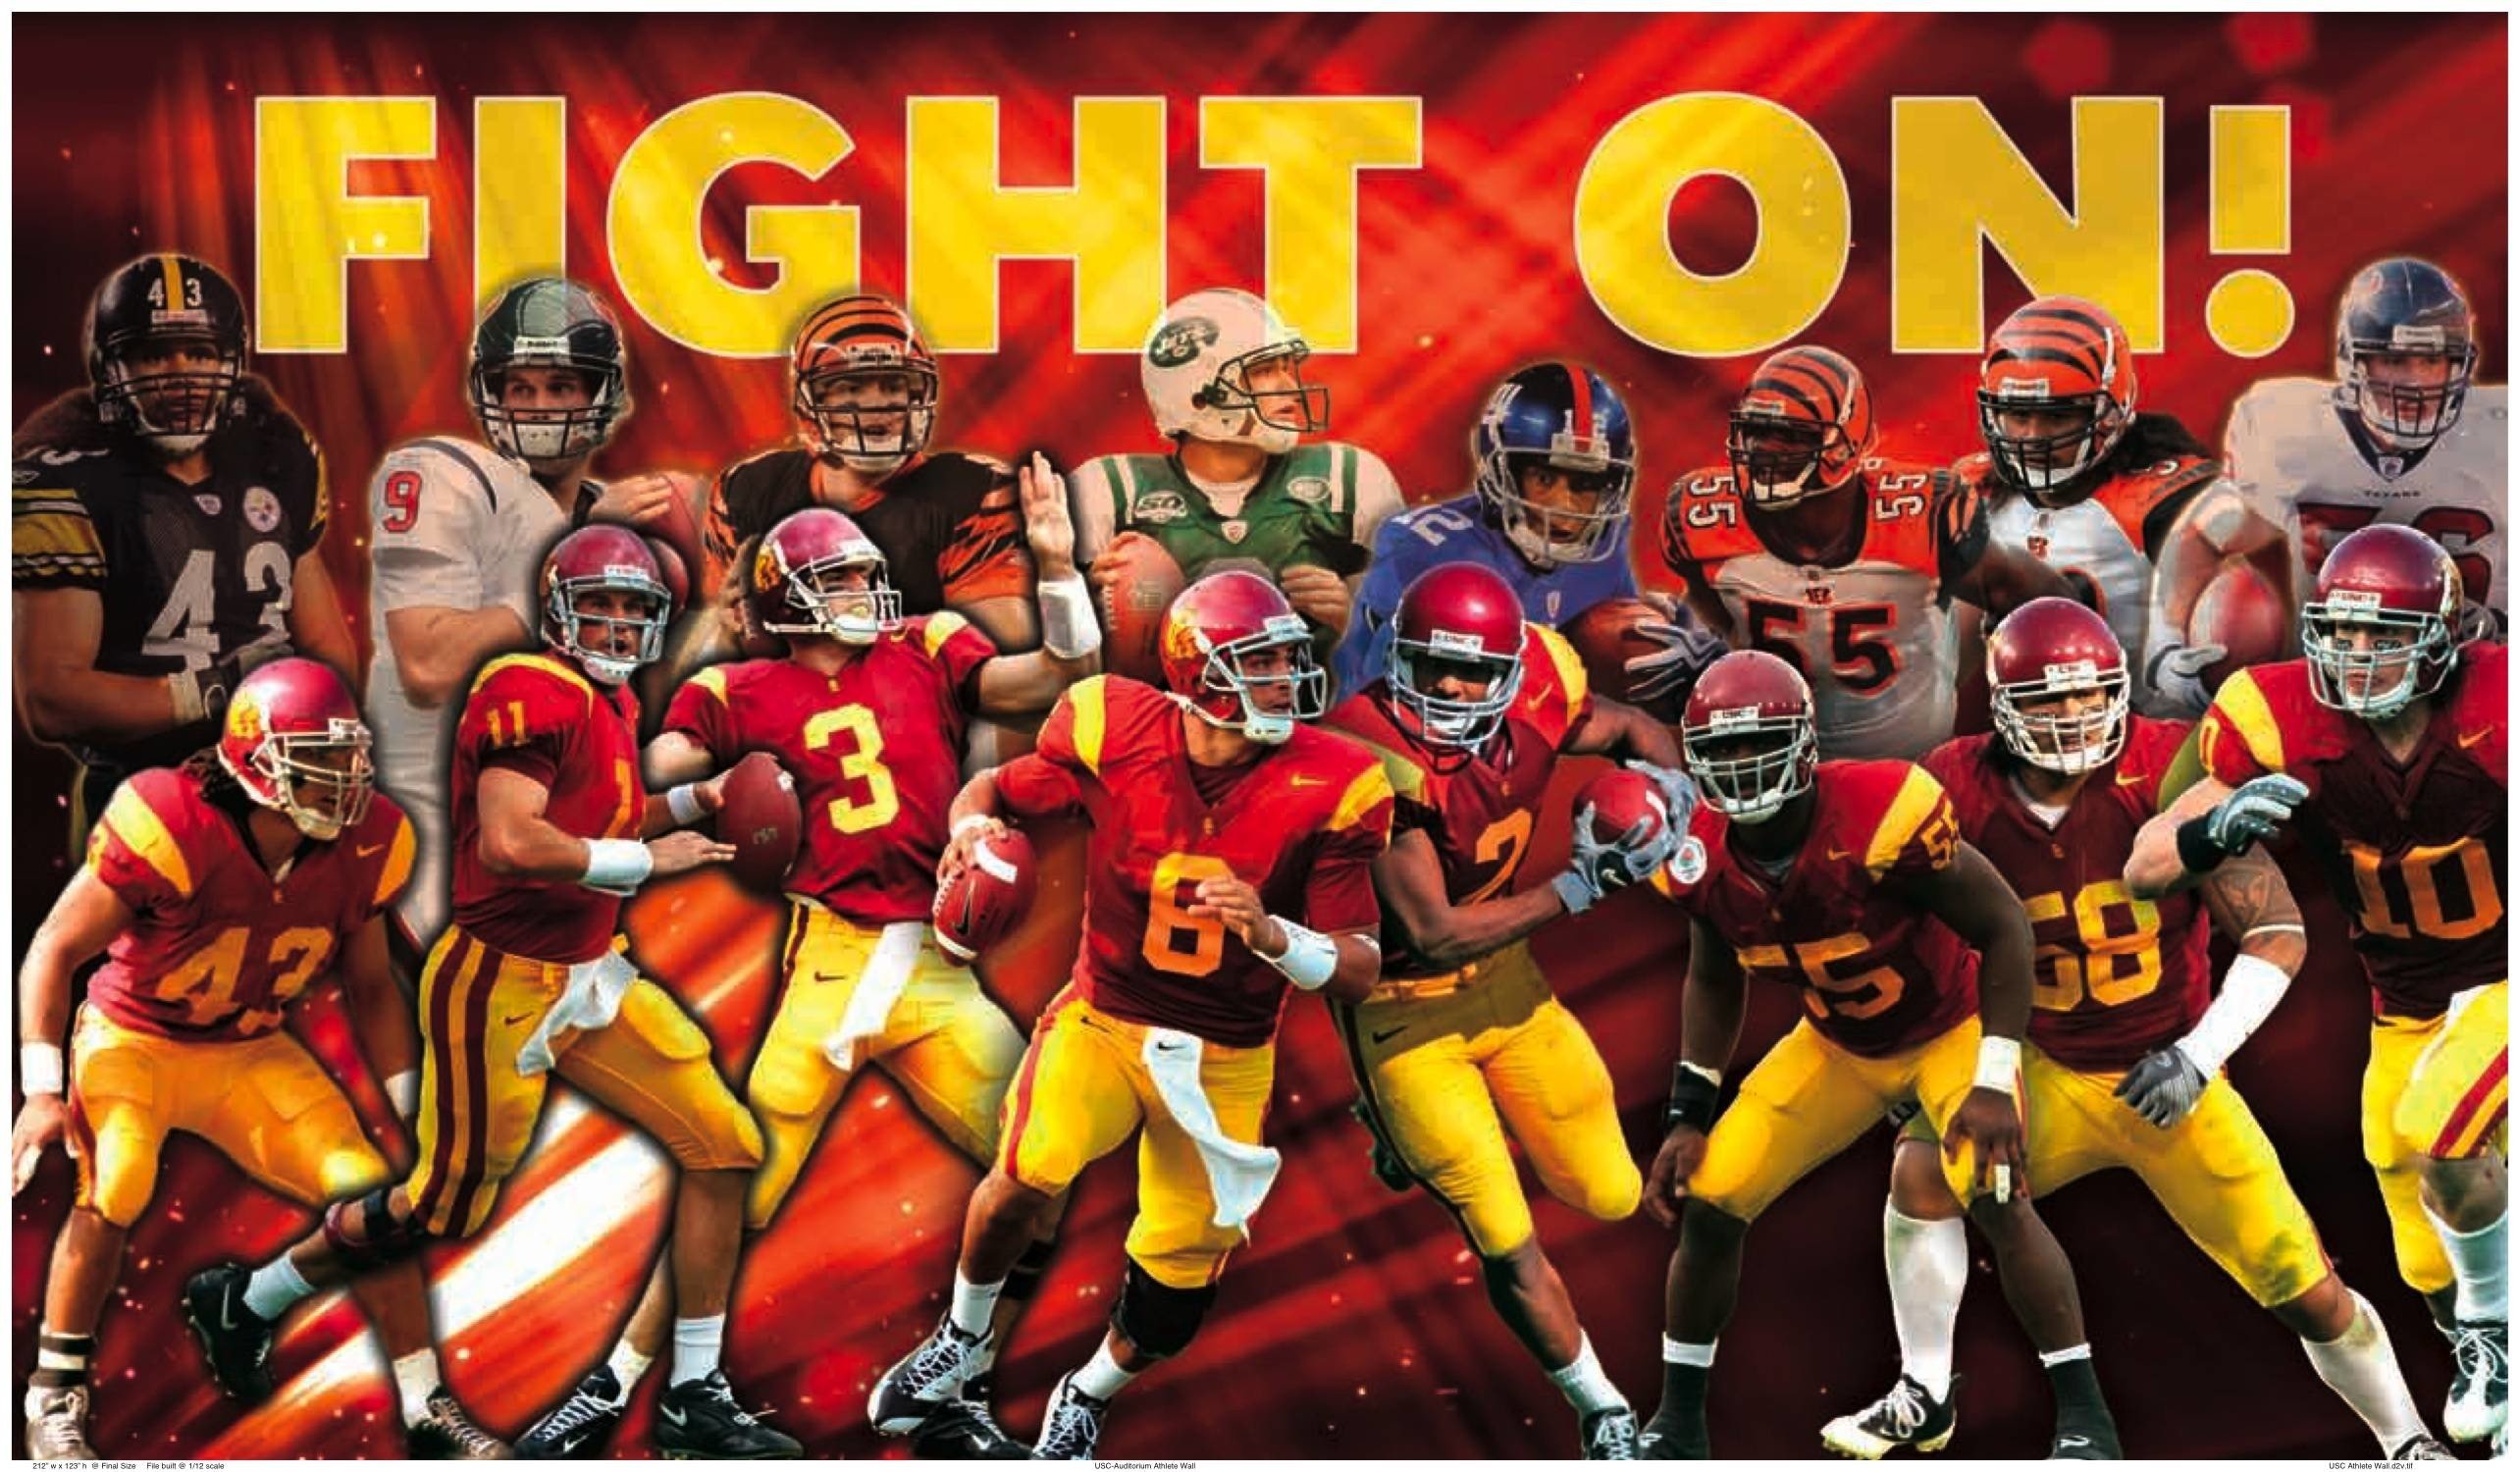 image For > Usc Football Wallpaper Data Src Free Football 14 Covers